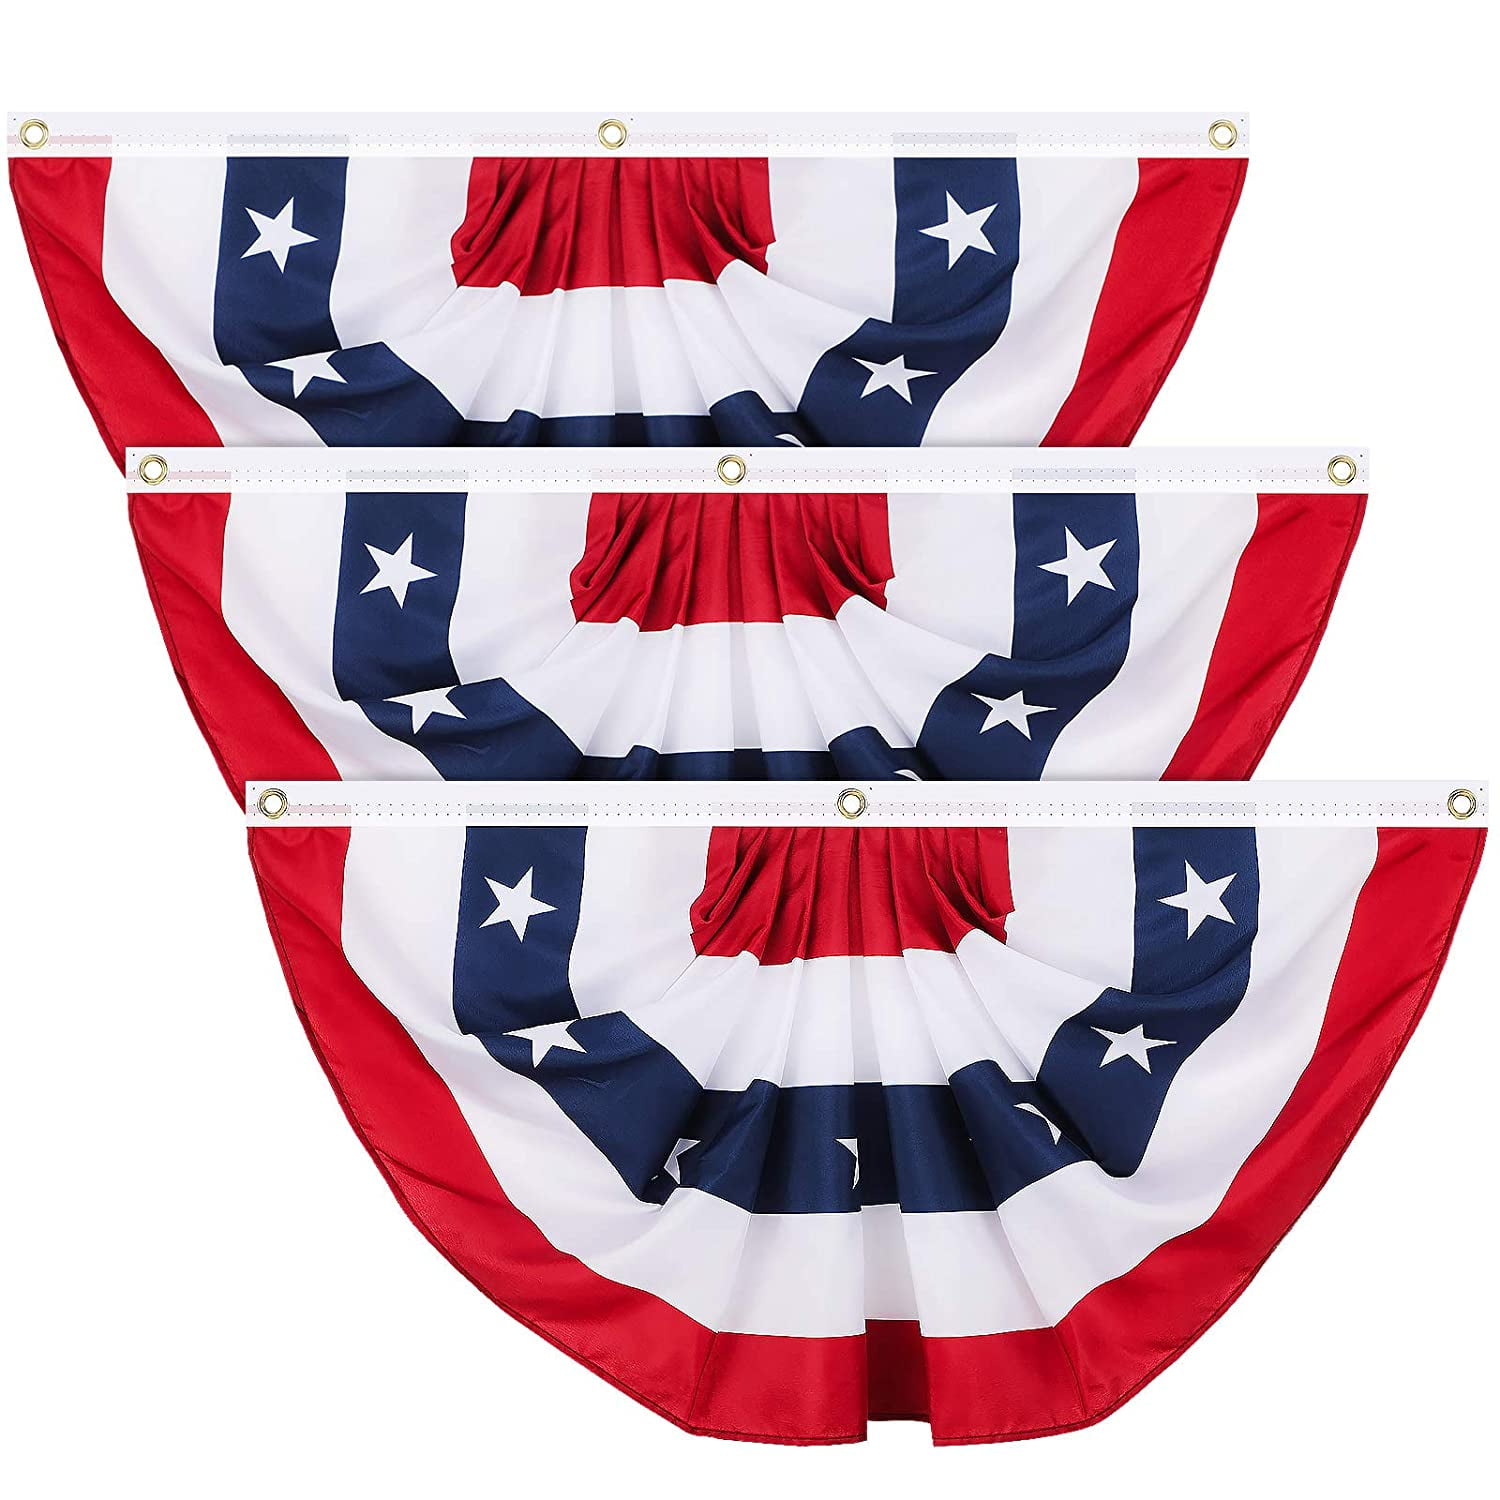 4PCS Pleated Fan Flag 3 X1.5 Ft American Flag Banner American US Bunting Flags Patriotic Bunting Half Fan Banner for 4th of July Decoration Indoor/Outdoor 